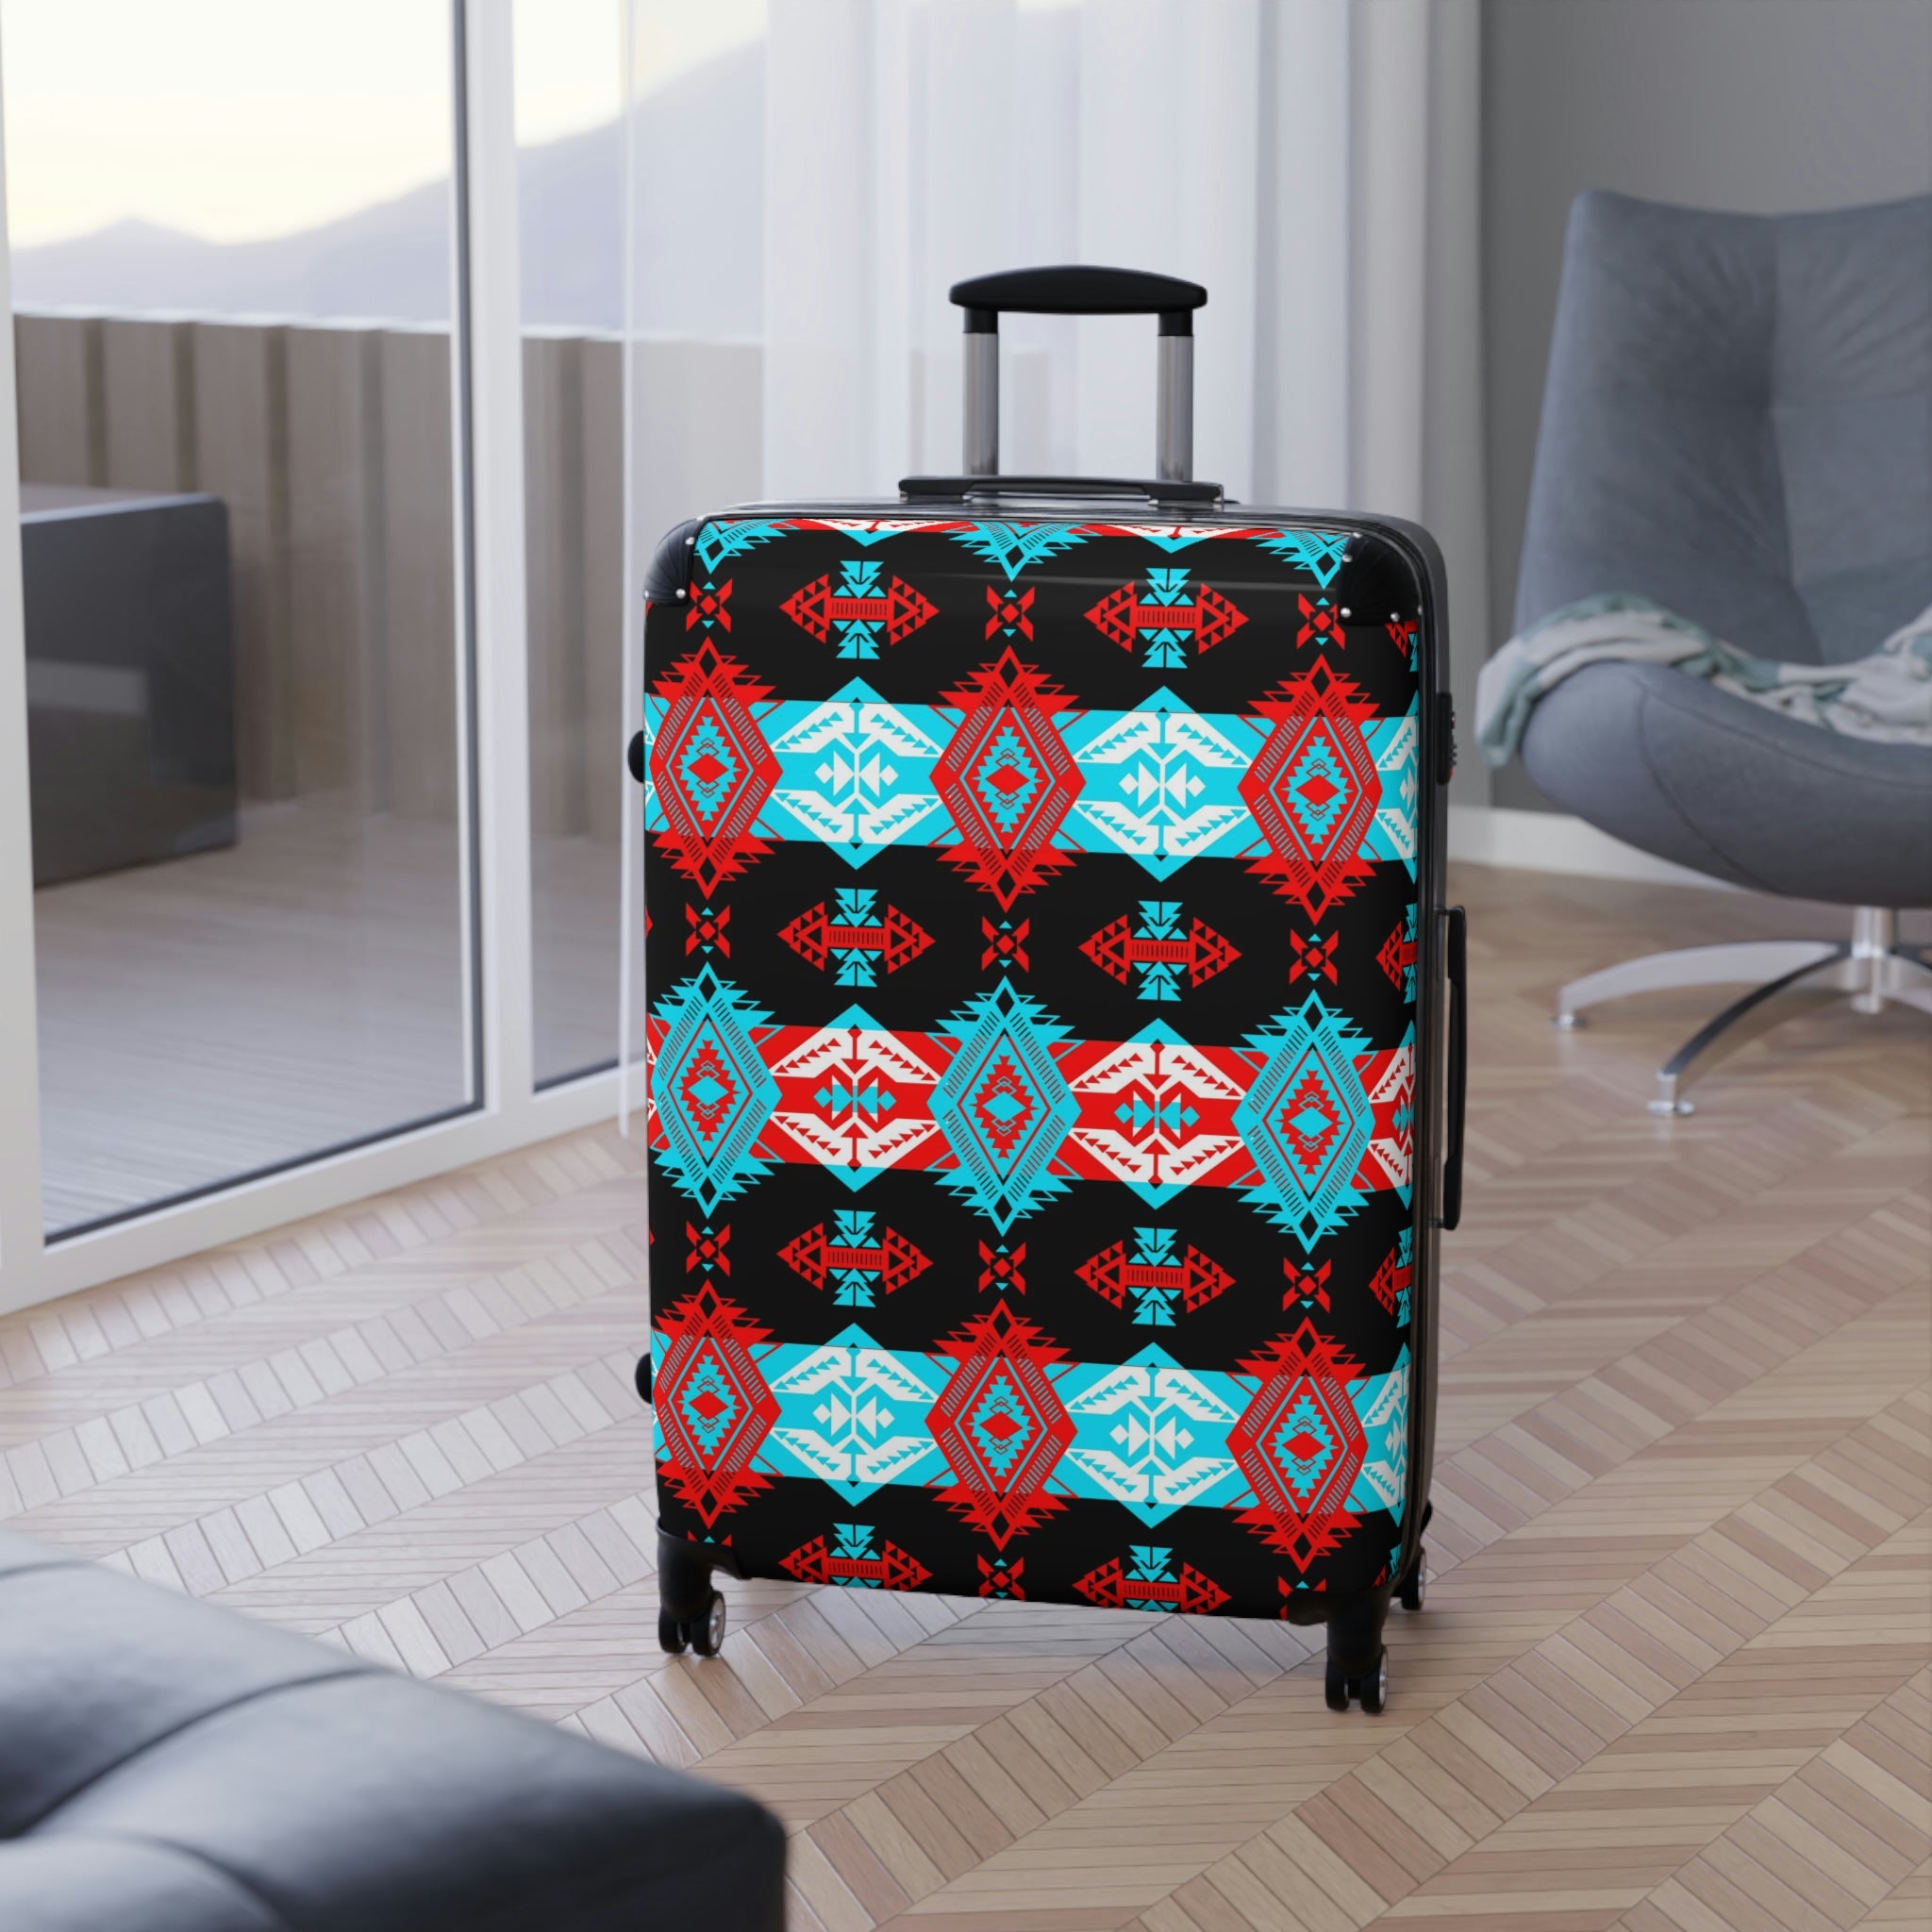 Sovereign Nation Trade Blanket Suitcases